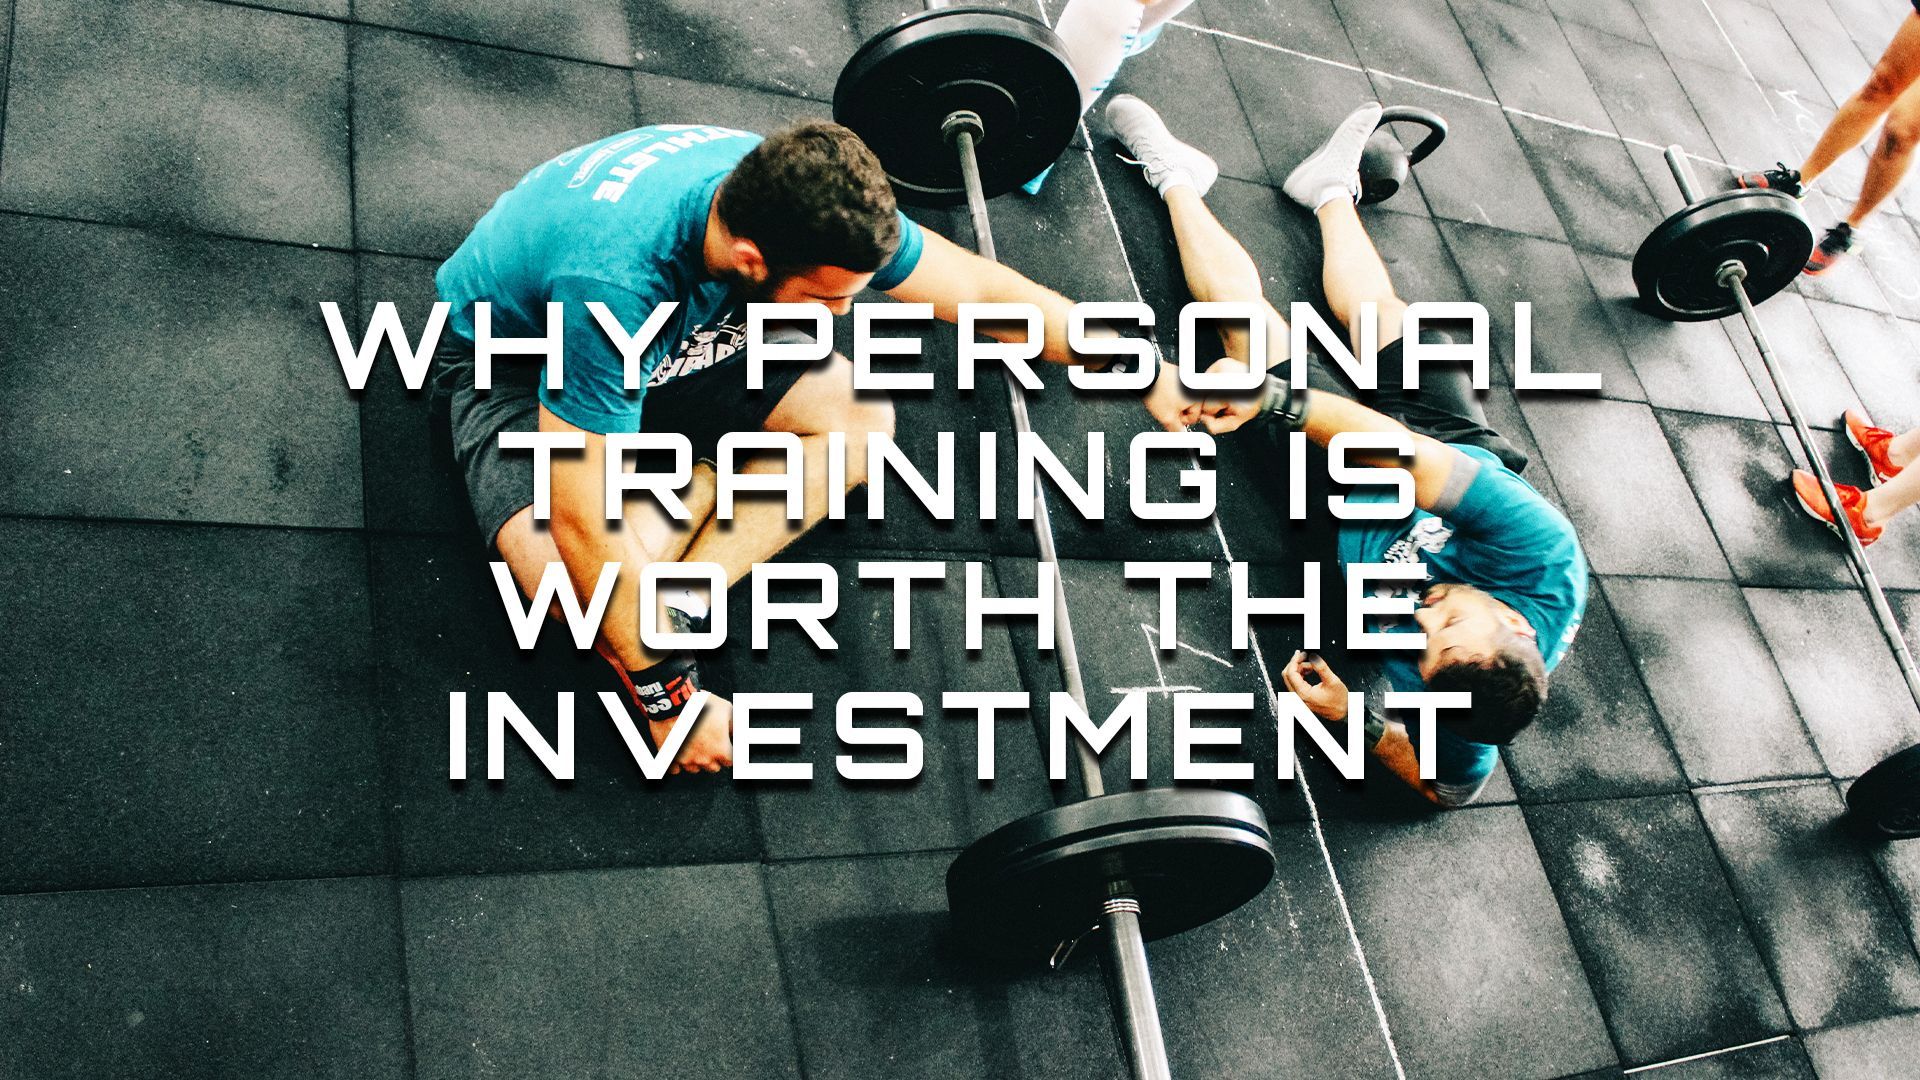 How Much Does Personal Training Cost?